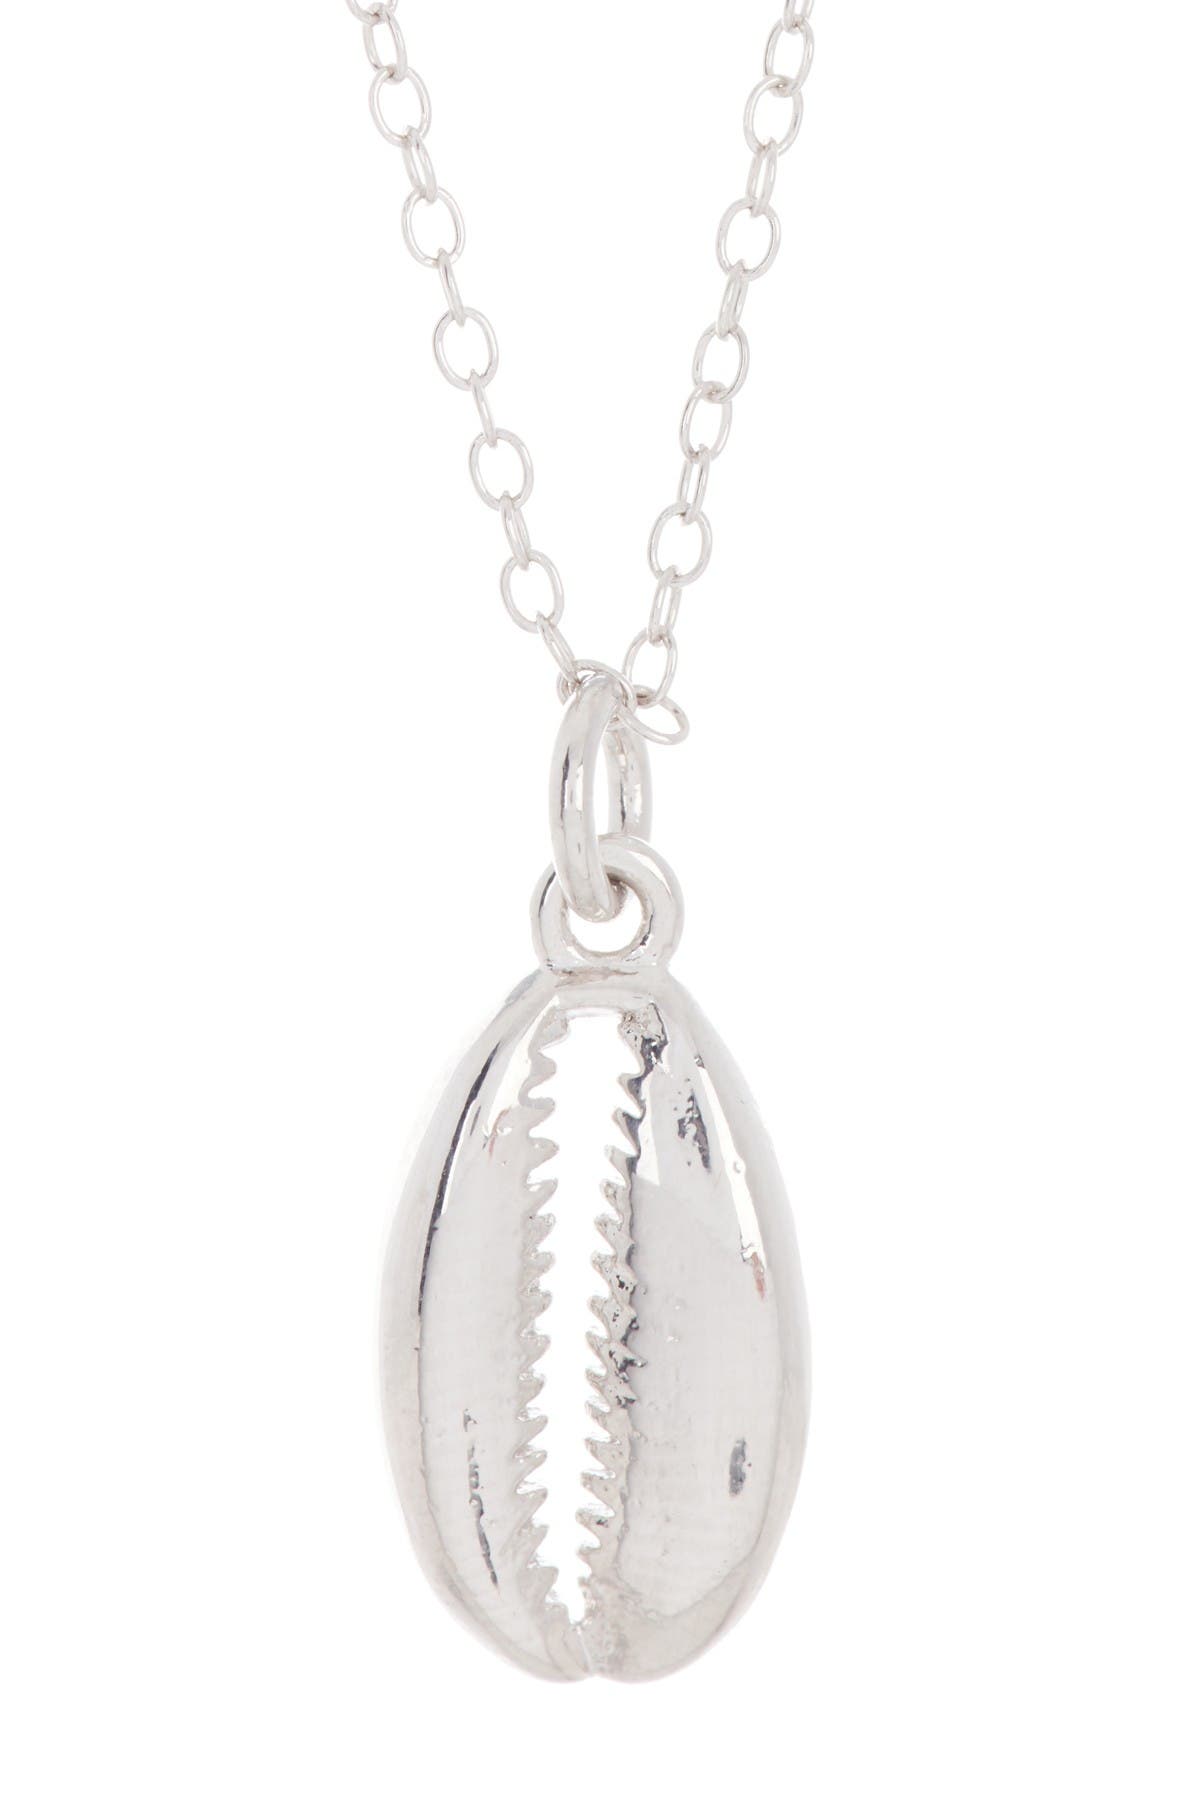 White Dosinia Shell on a Silver Chain Necklace